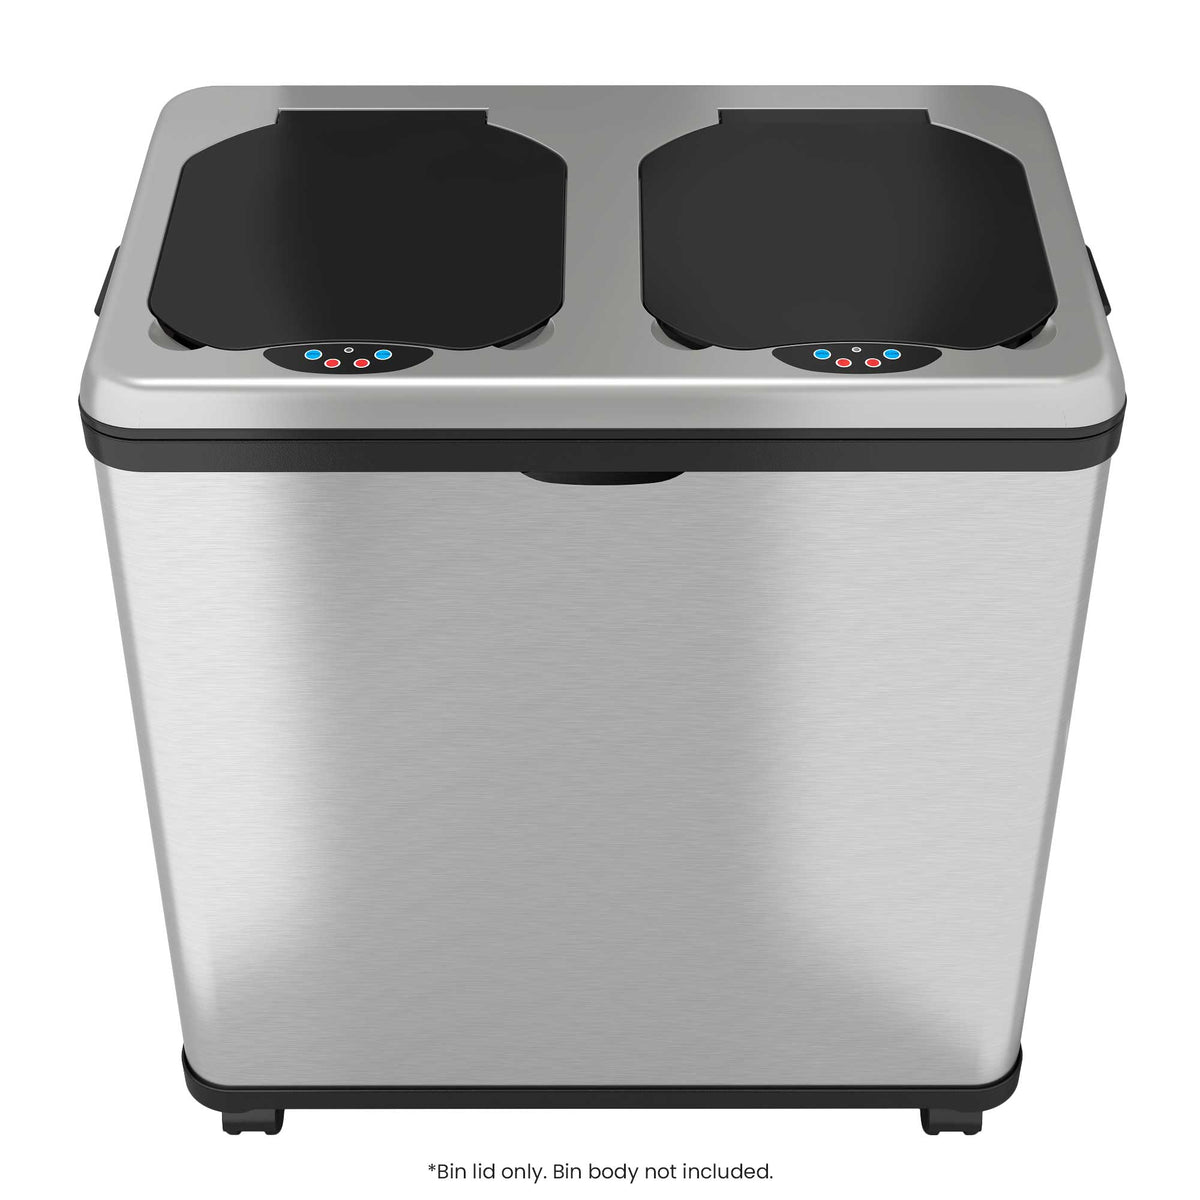 Replacement lid for iTouchless IT16RES model trash can. Bin lid only; bin body not included.